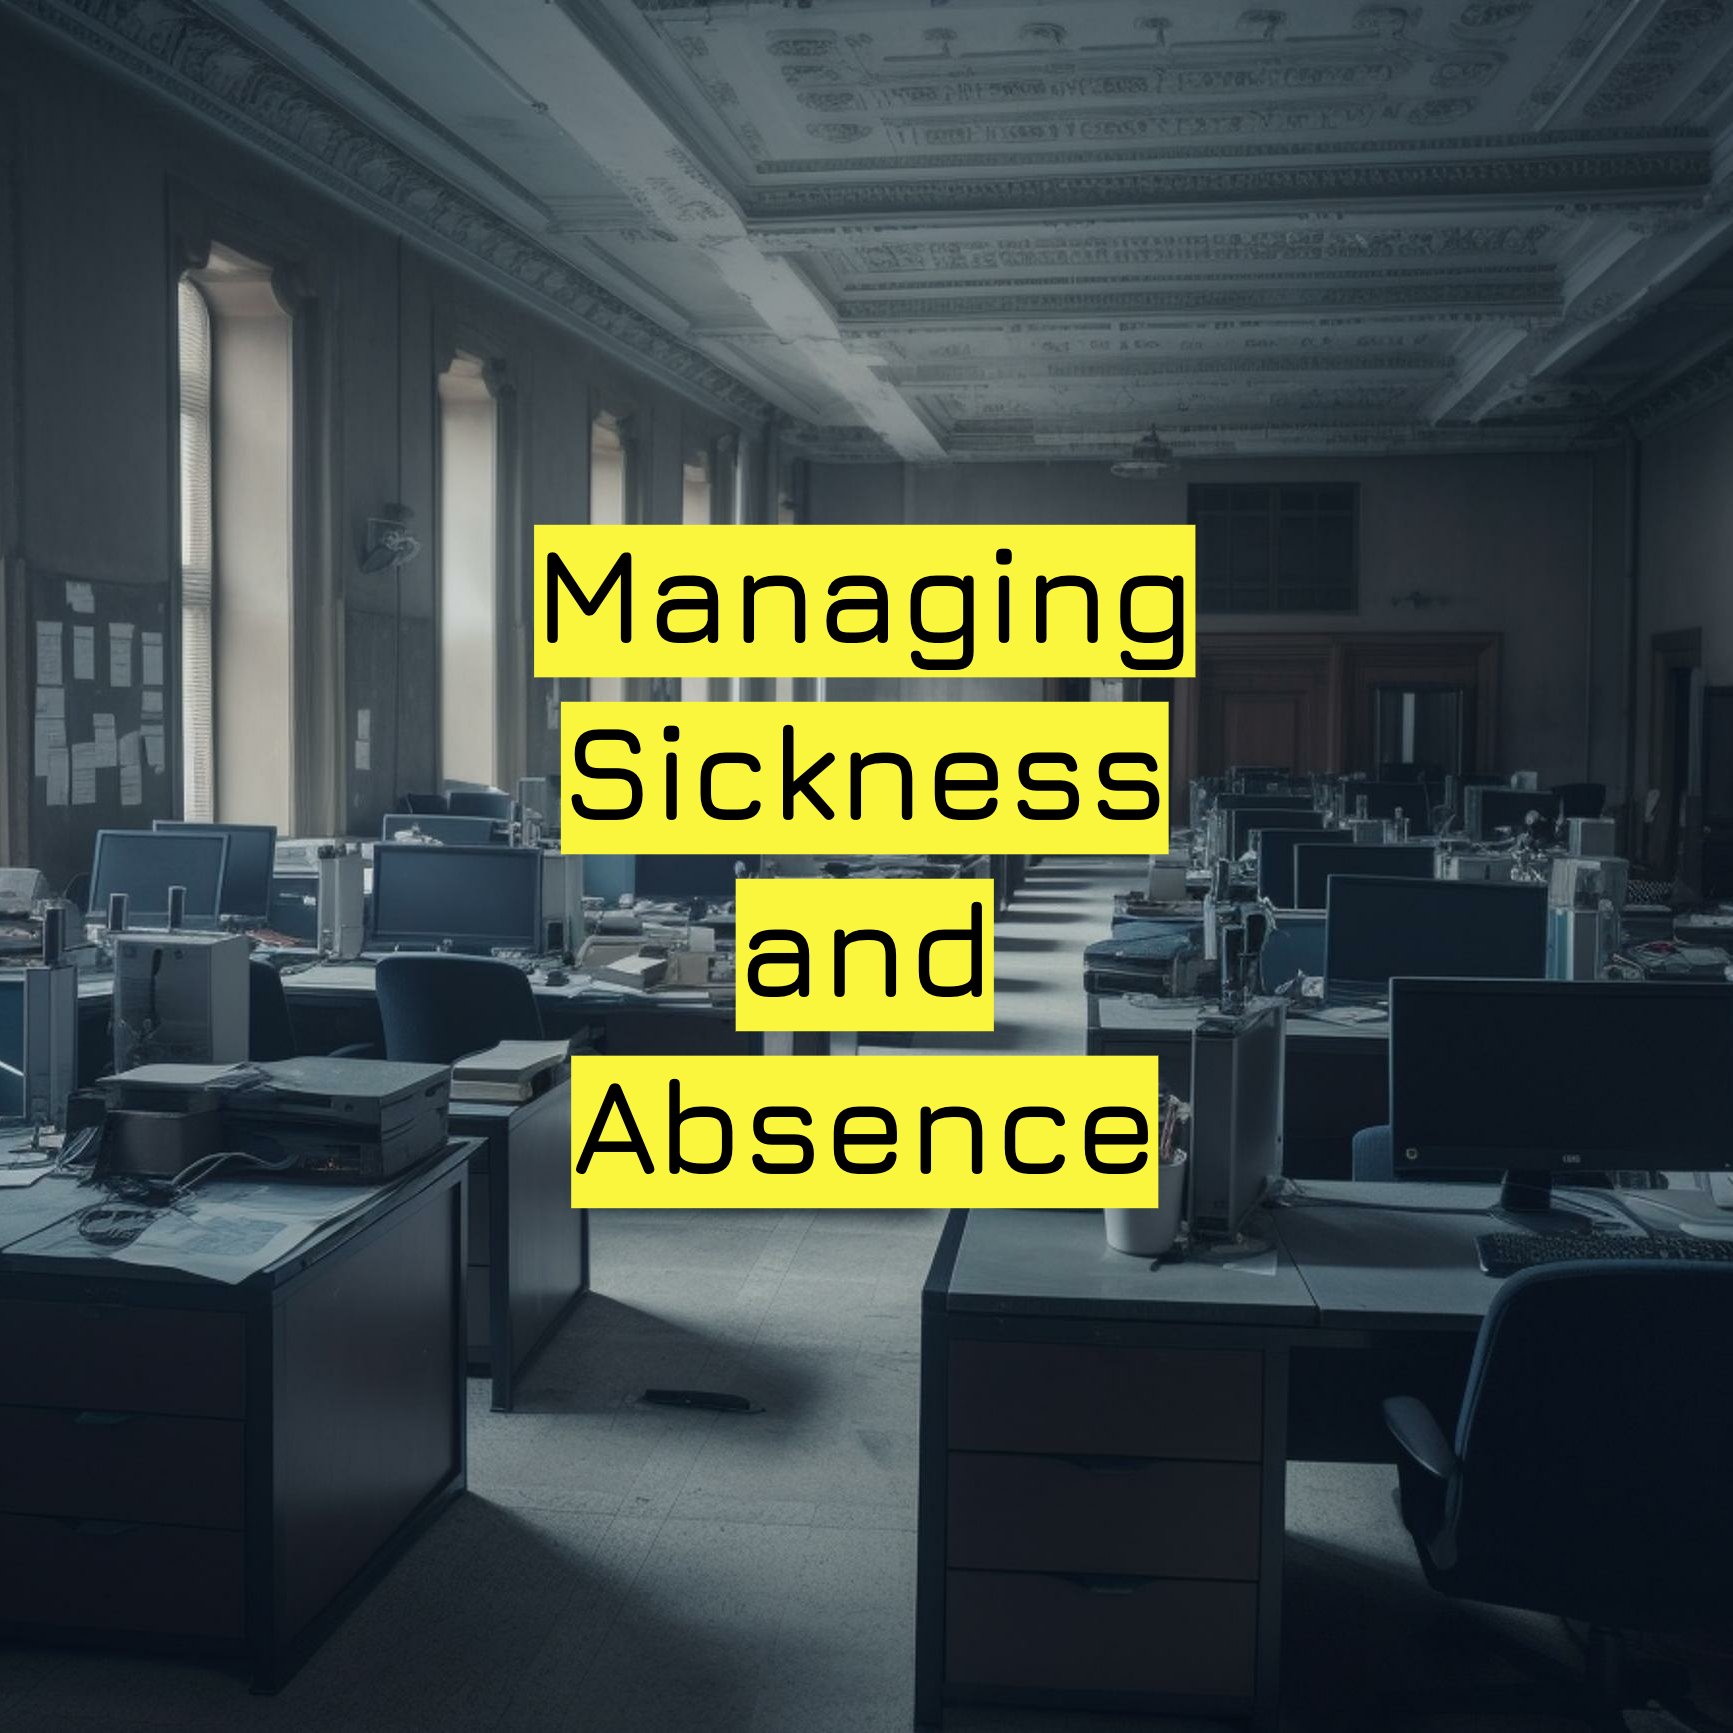 Managing Sickness and Absence .jpg